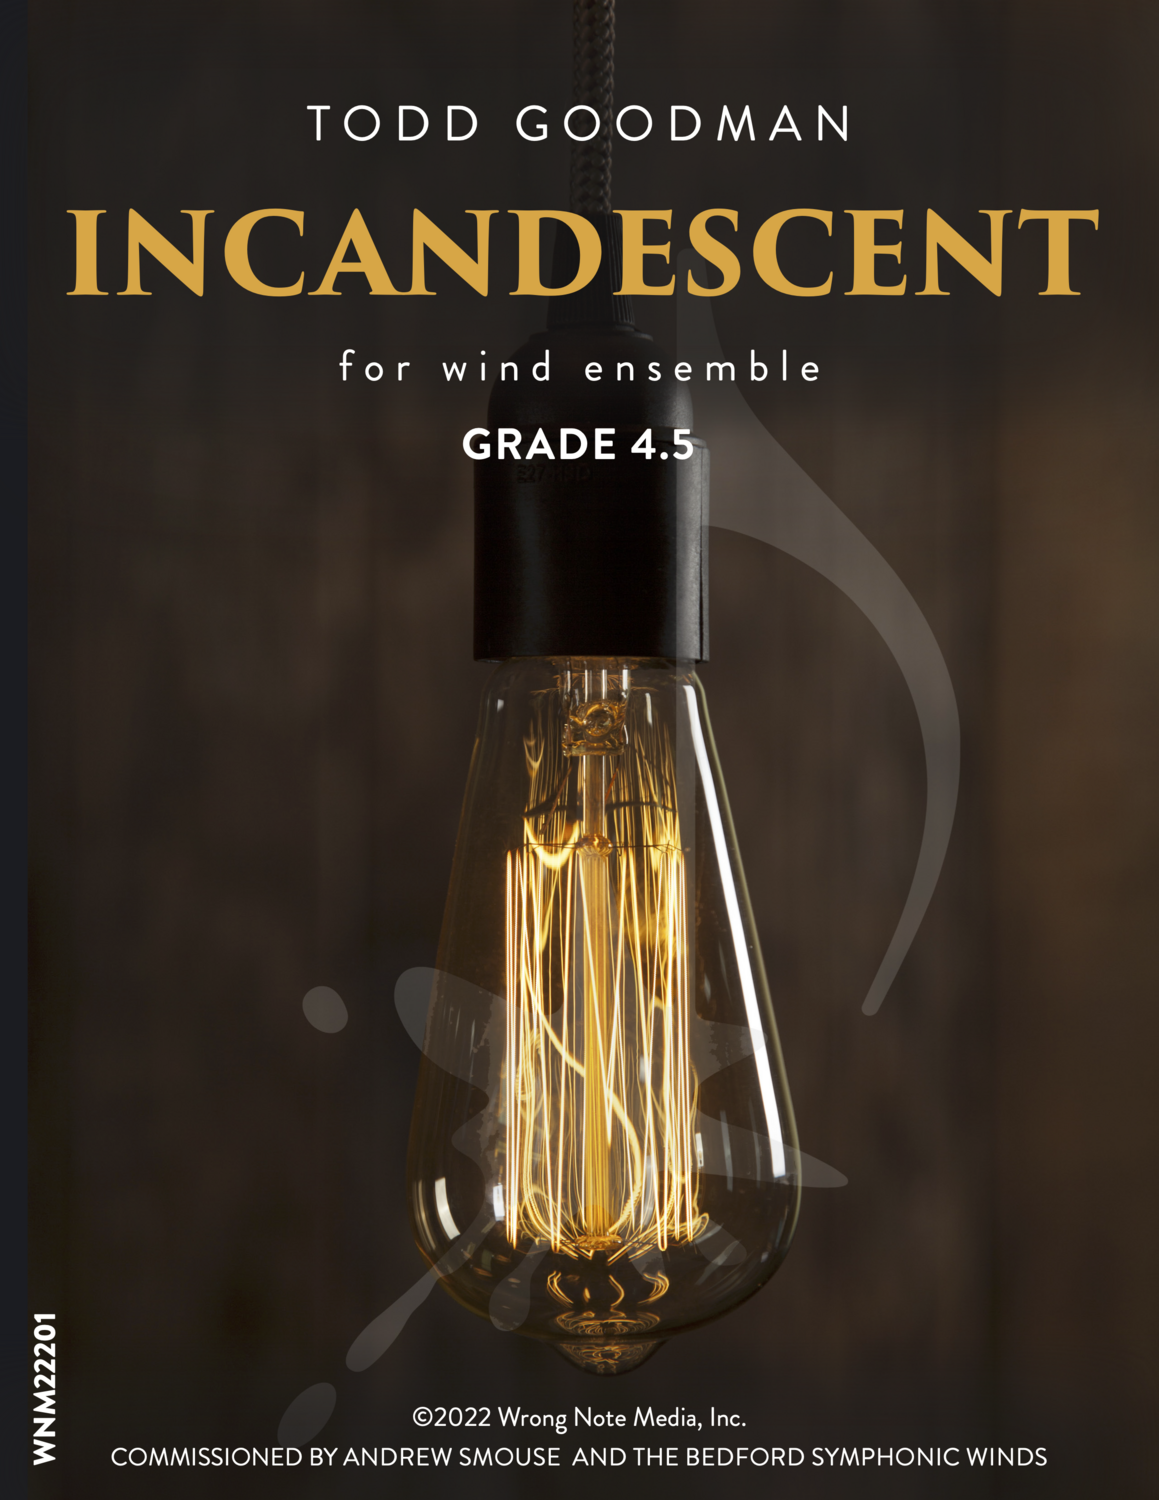 INCANDESCENT by Todd Goodman